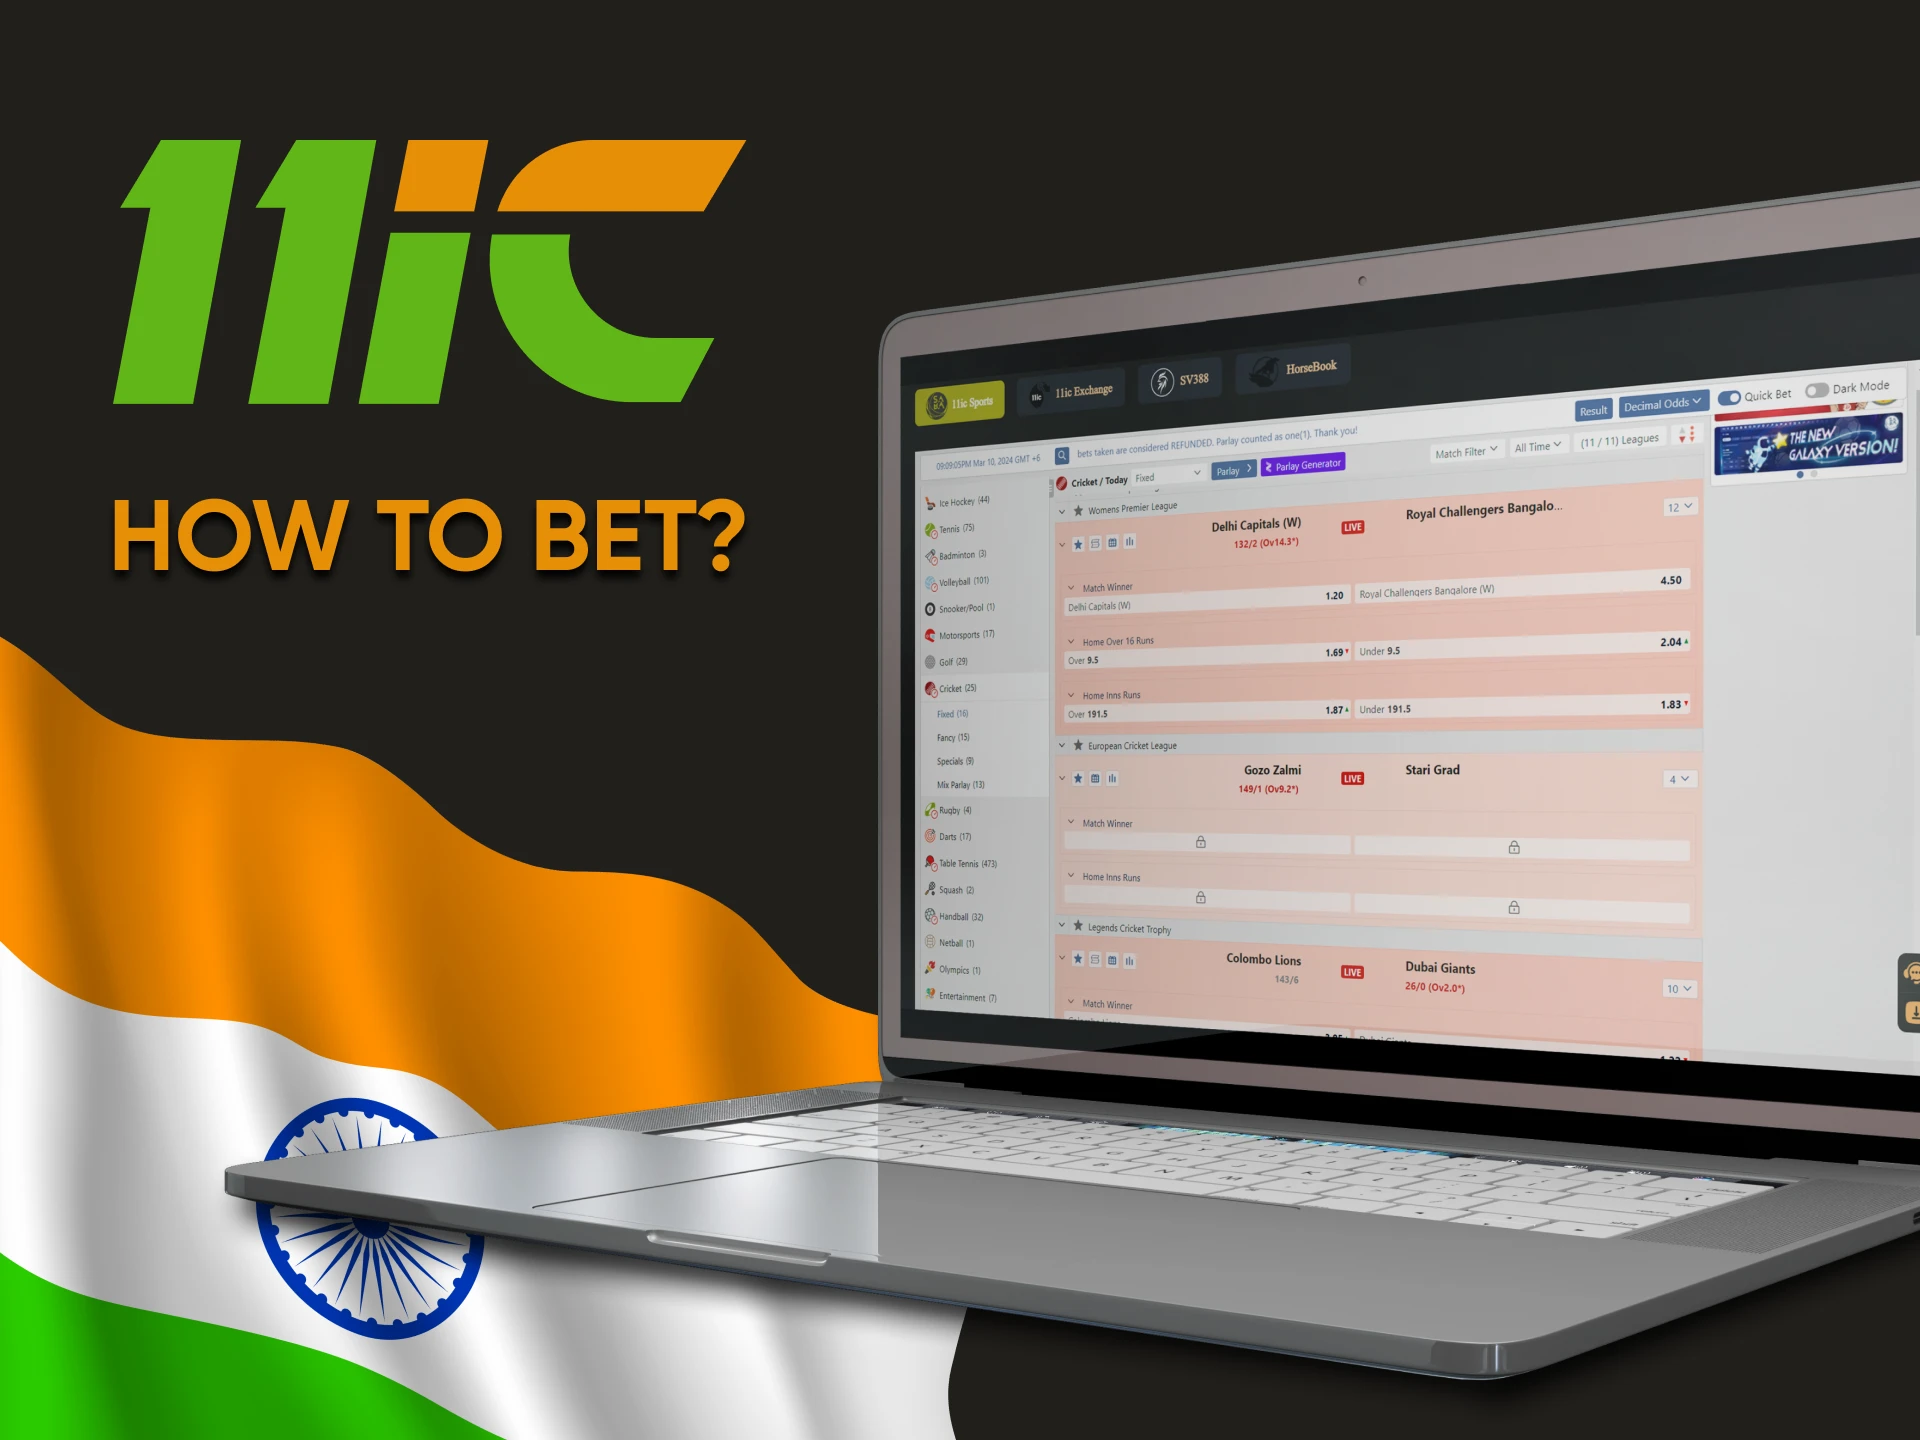 We will tell you how to bet on 11ic.